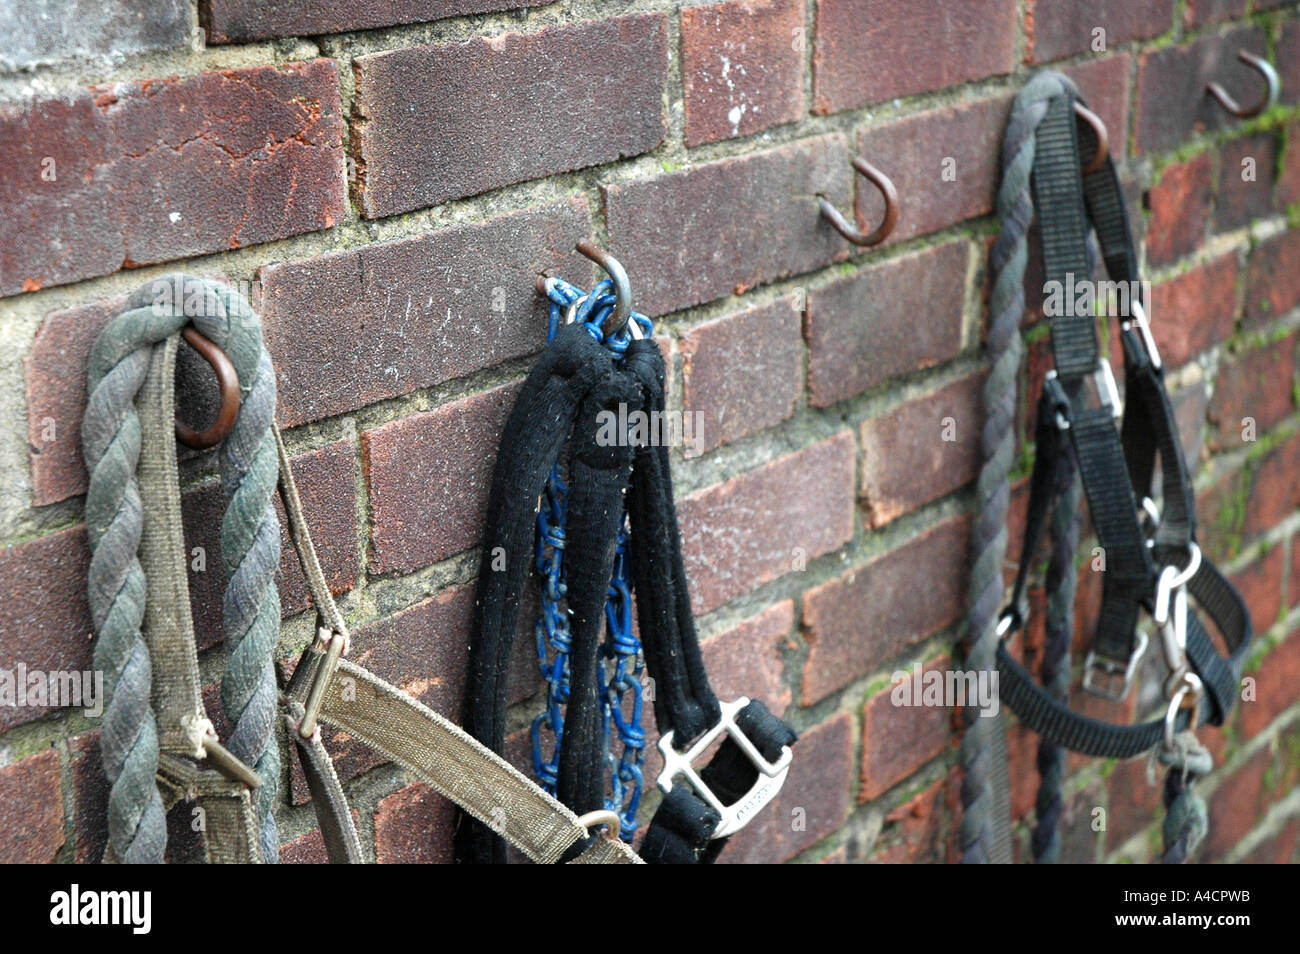 Ropes hanging on a wall Stock Photo